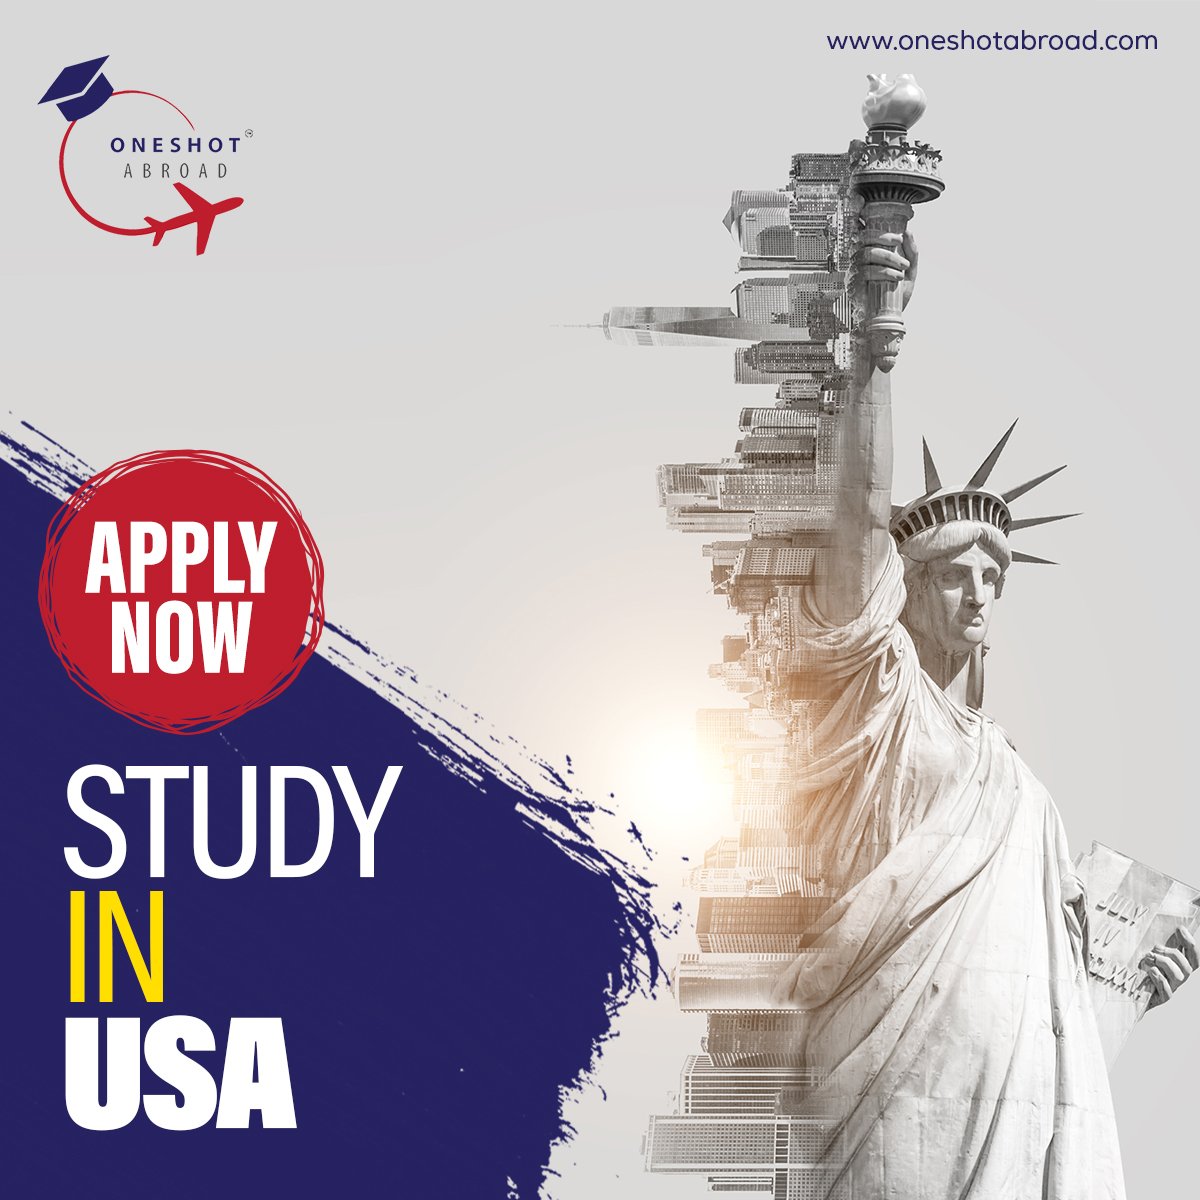 Study in USA with Expert Counseling!

Admissions Open for 2023

Enroll Now @oneshotabroad
.
#studyincanada #studyinuk #studyinusa #studyabroad #expertcounsellor #expertcounselling #studyabroadconsultants #education #usastudy #usa #education